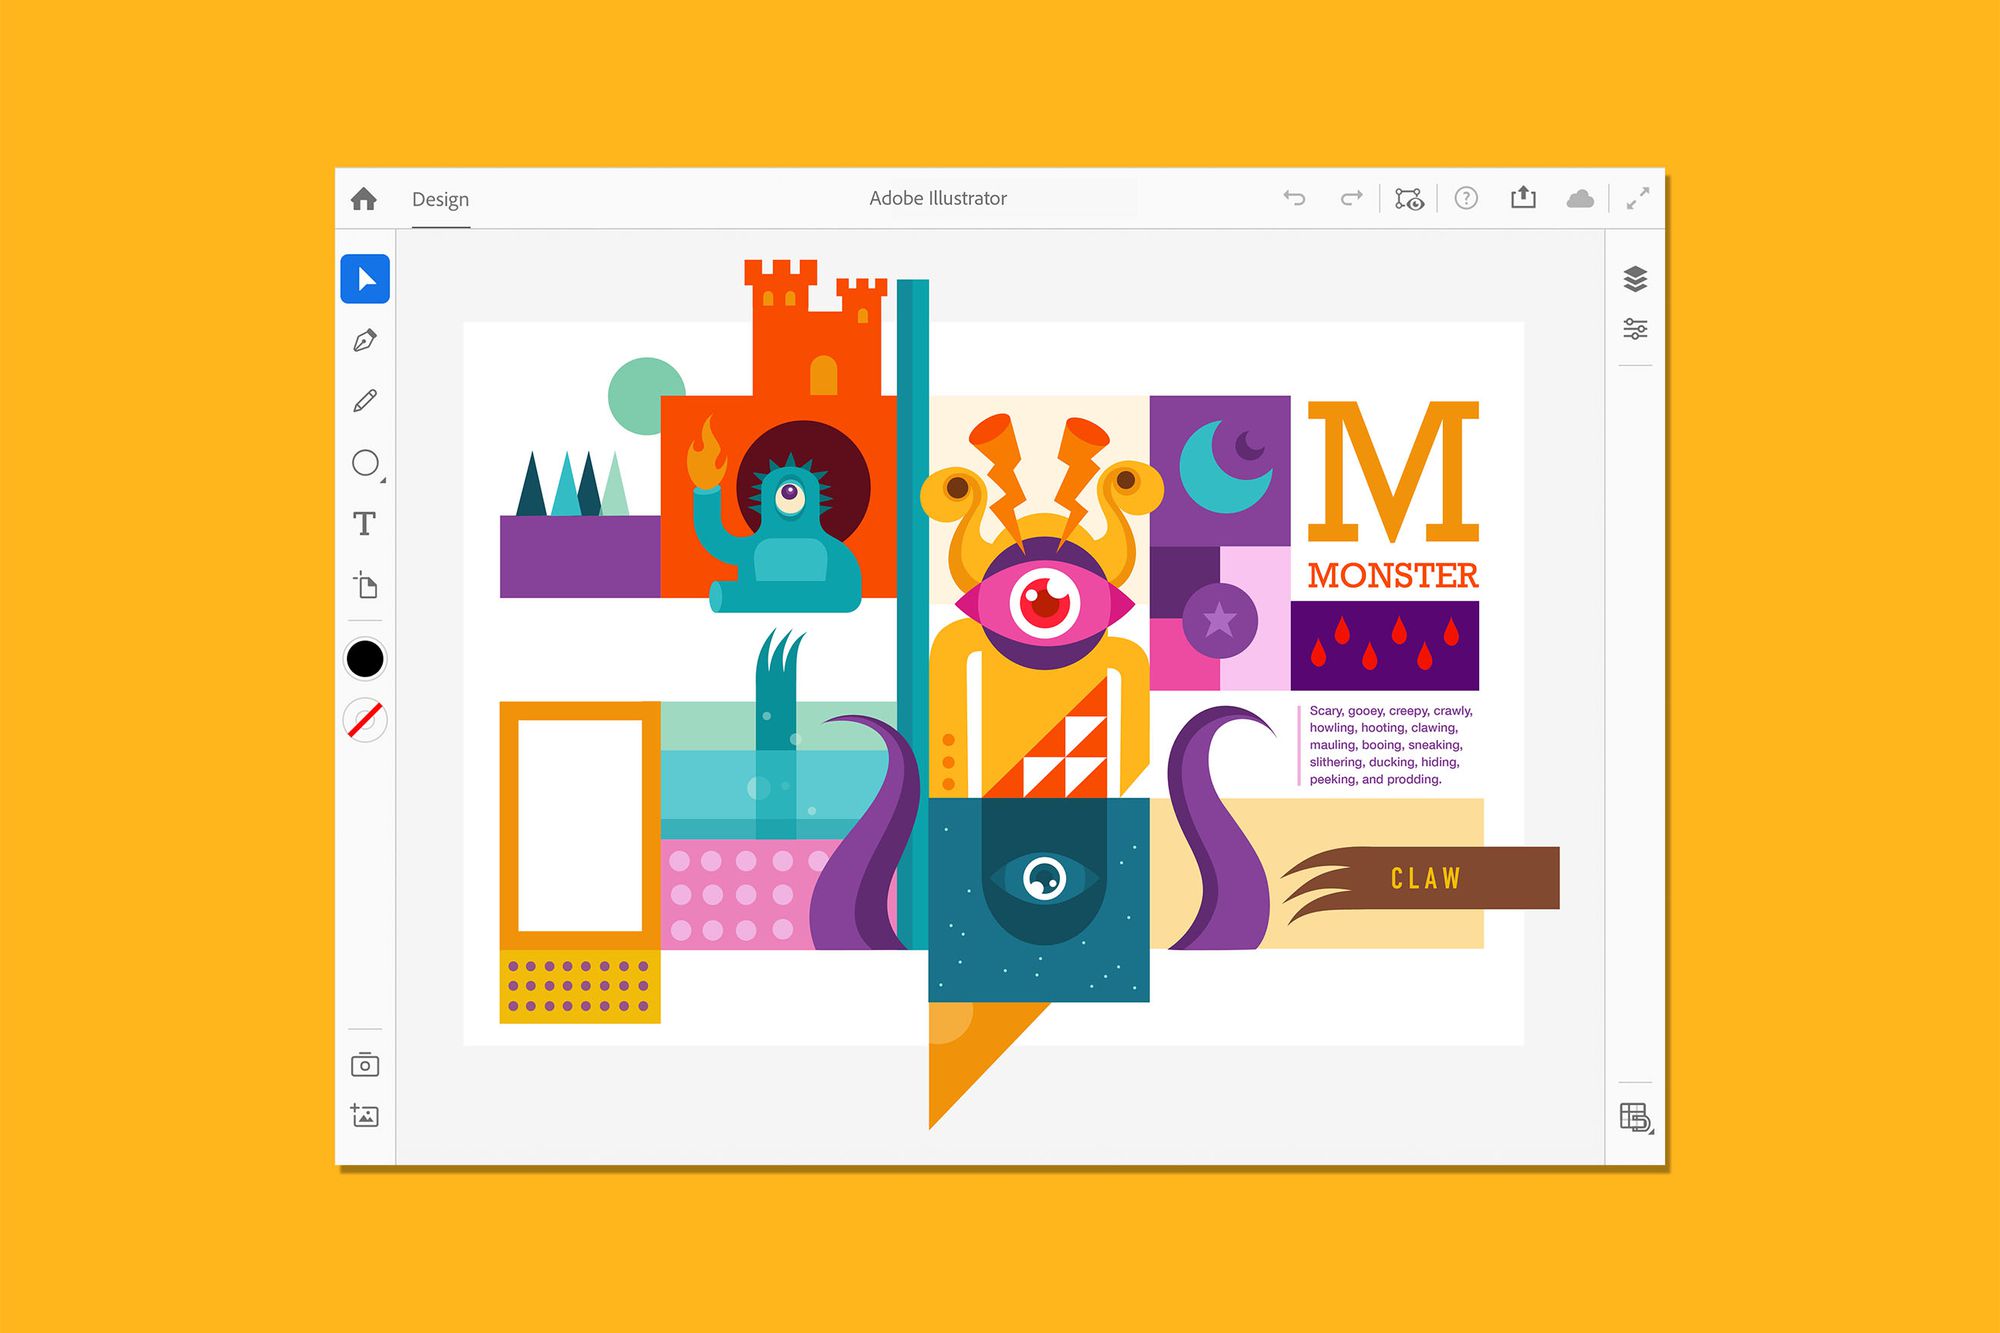 Adobe Illustrator for iPad: all the biggest features